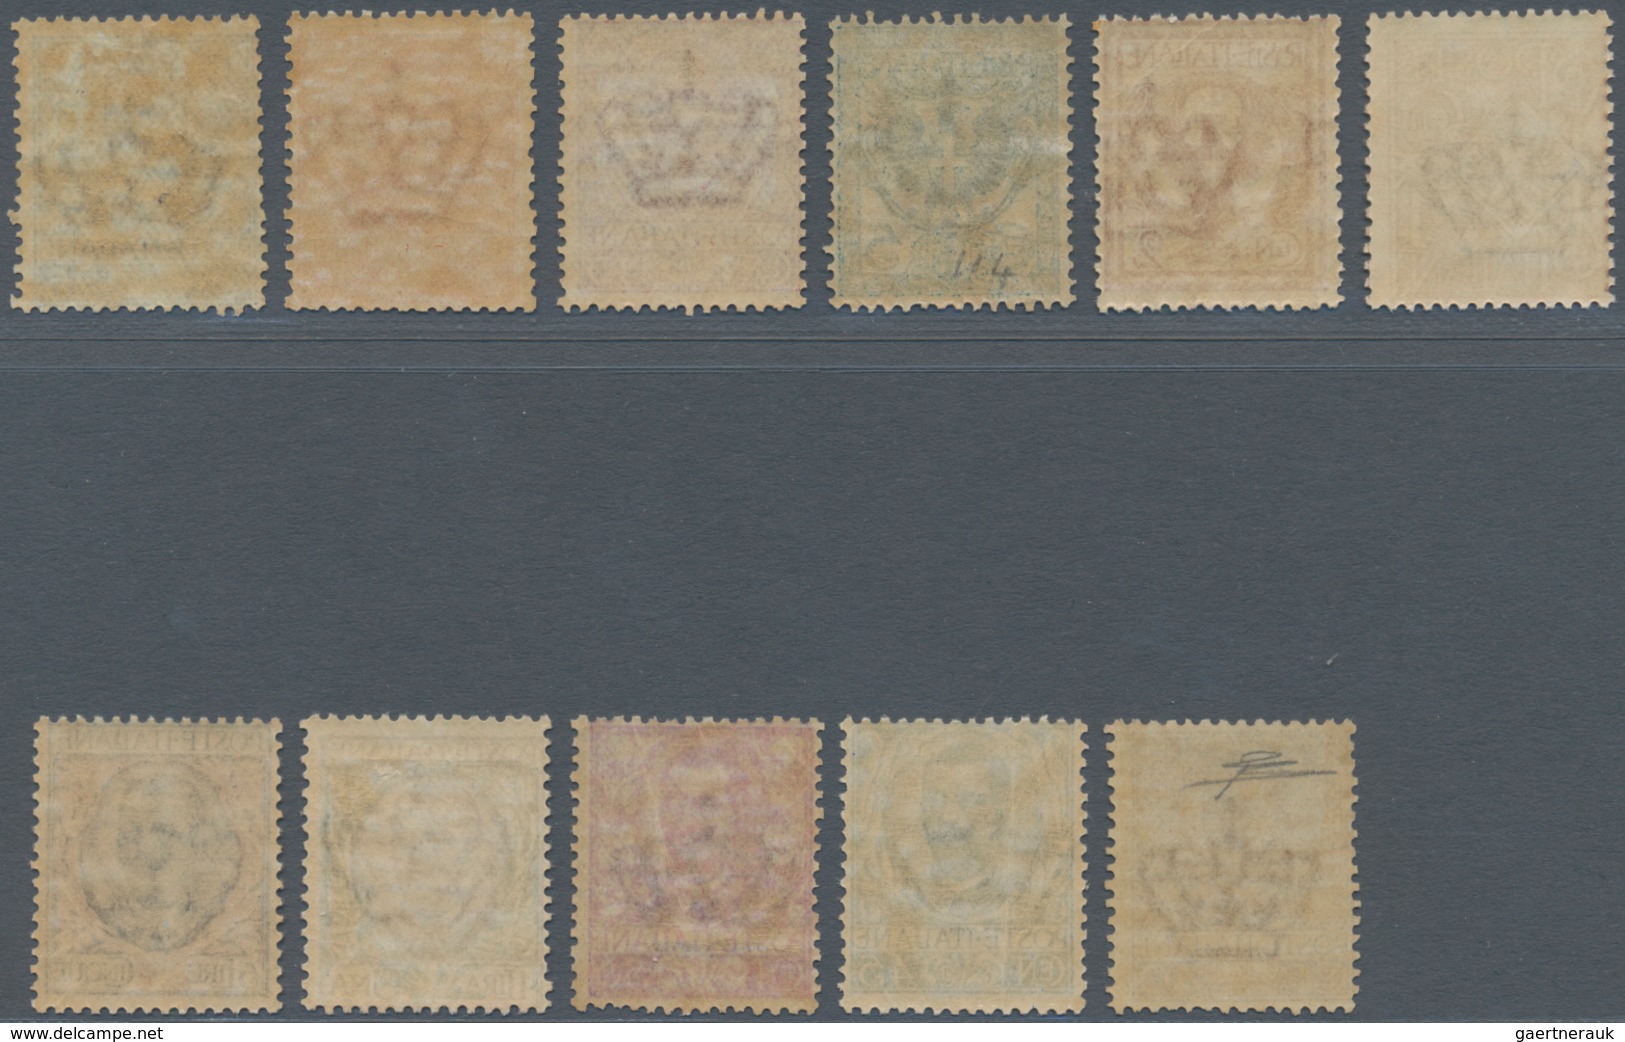 00958 Italien: 1901: "Floreale" Complete Set Of 11 Values, MNH. The 40 Cents With The Certificate Of R. Di - Marcofilie